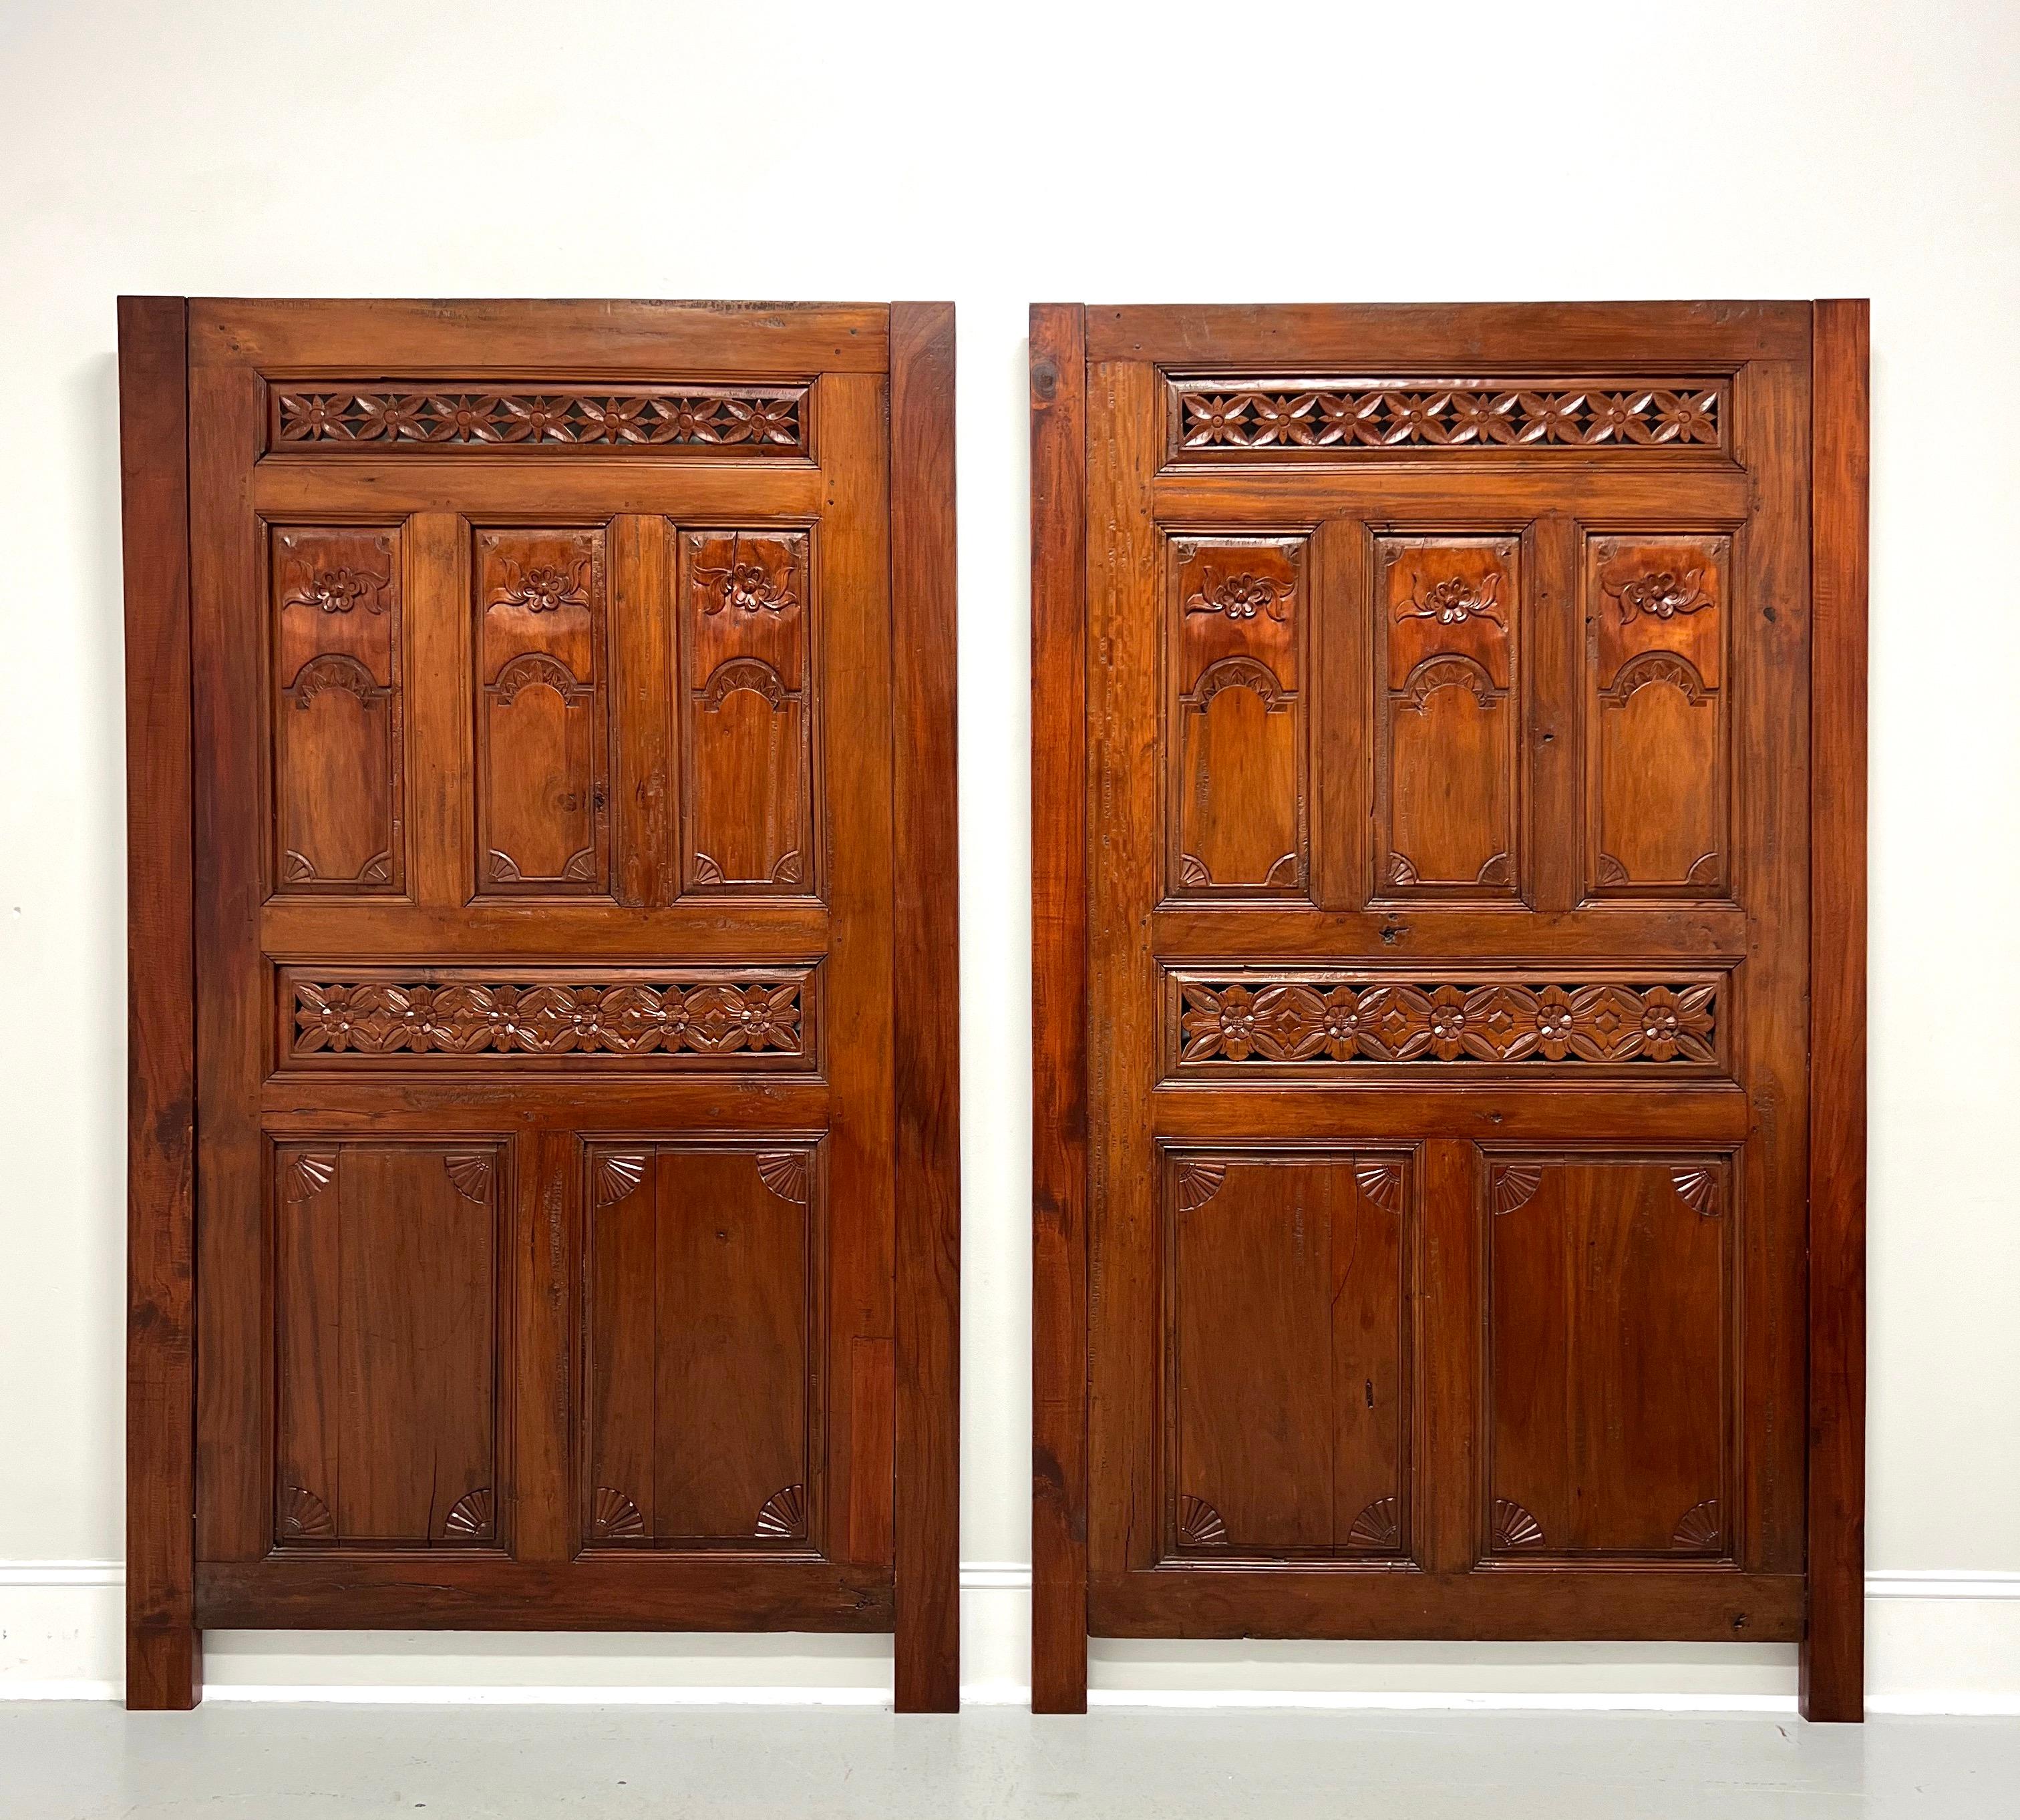 20th Century Carved Balinese Mahogany Doors Converted to Headboards - Pair For Sale 4